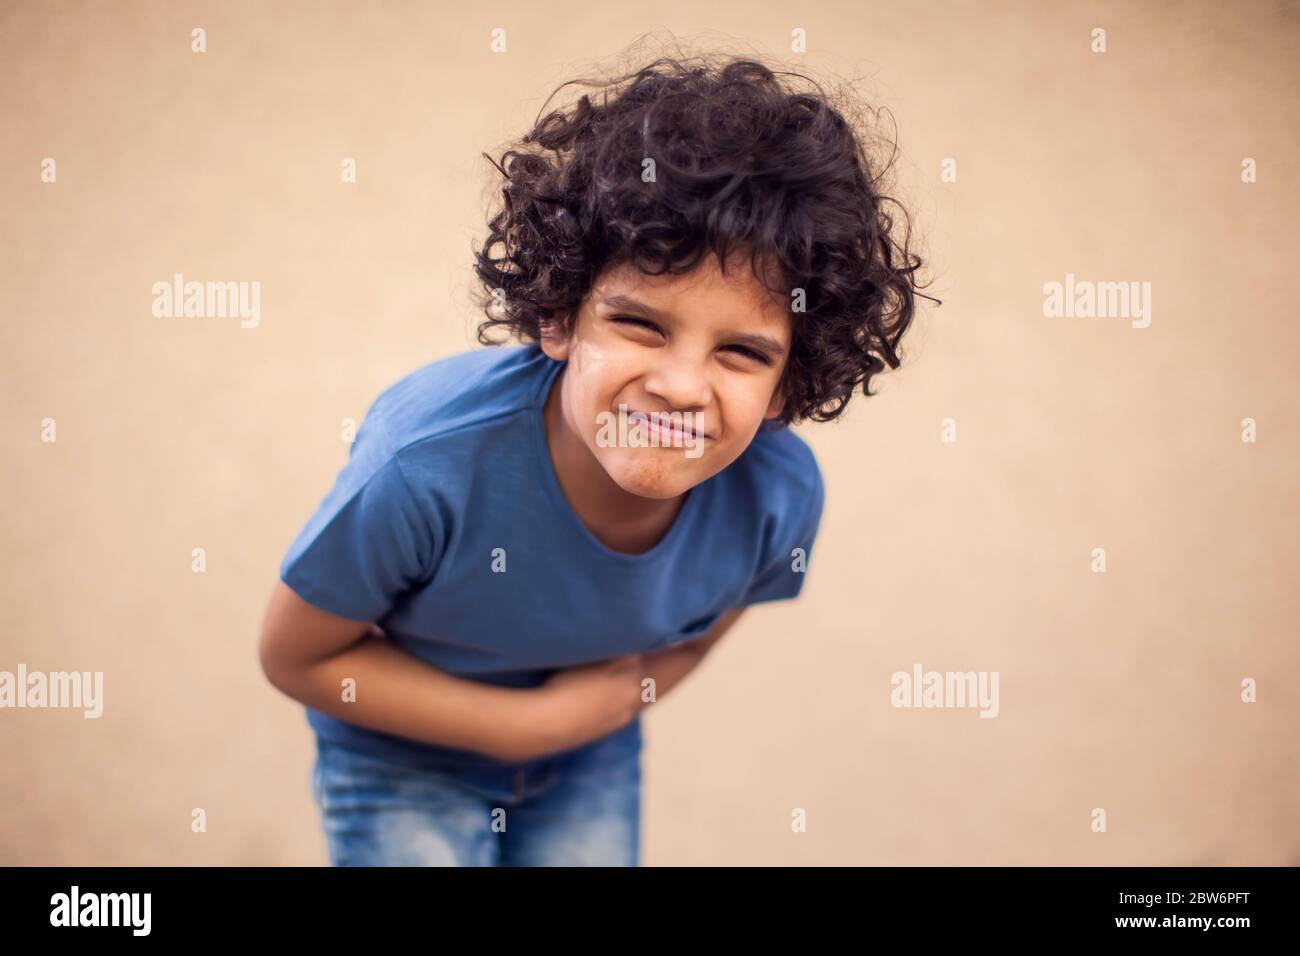 Kid boy feels strong stomach ache. Children, healthcare and medicine concept Stock Photo